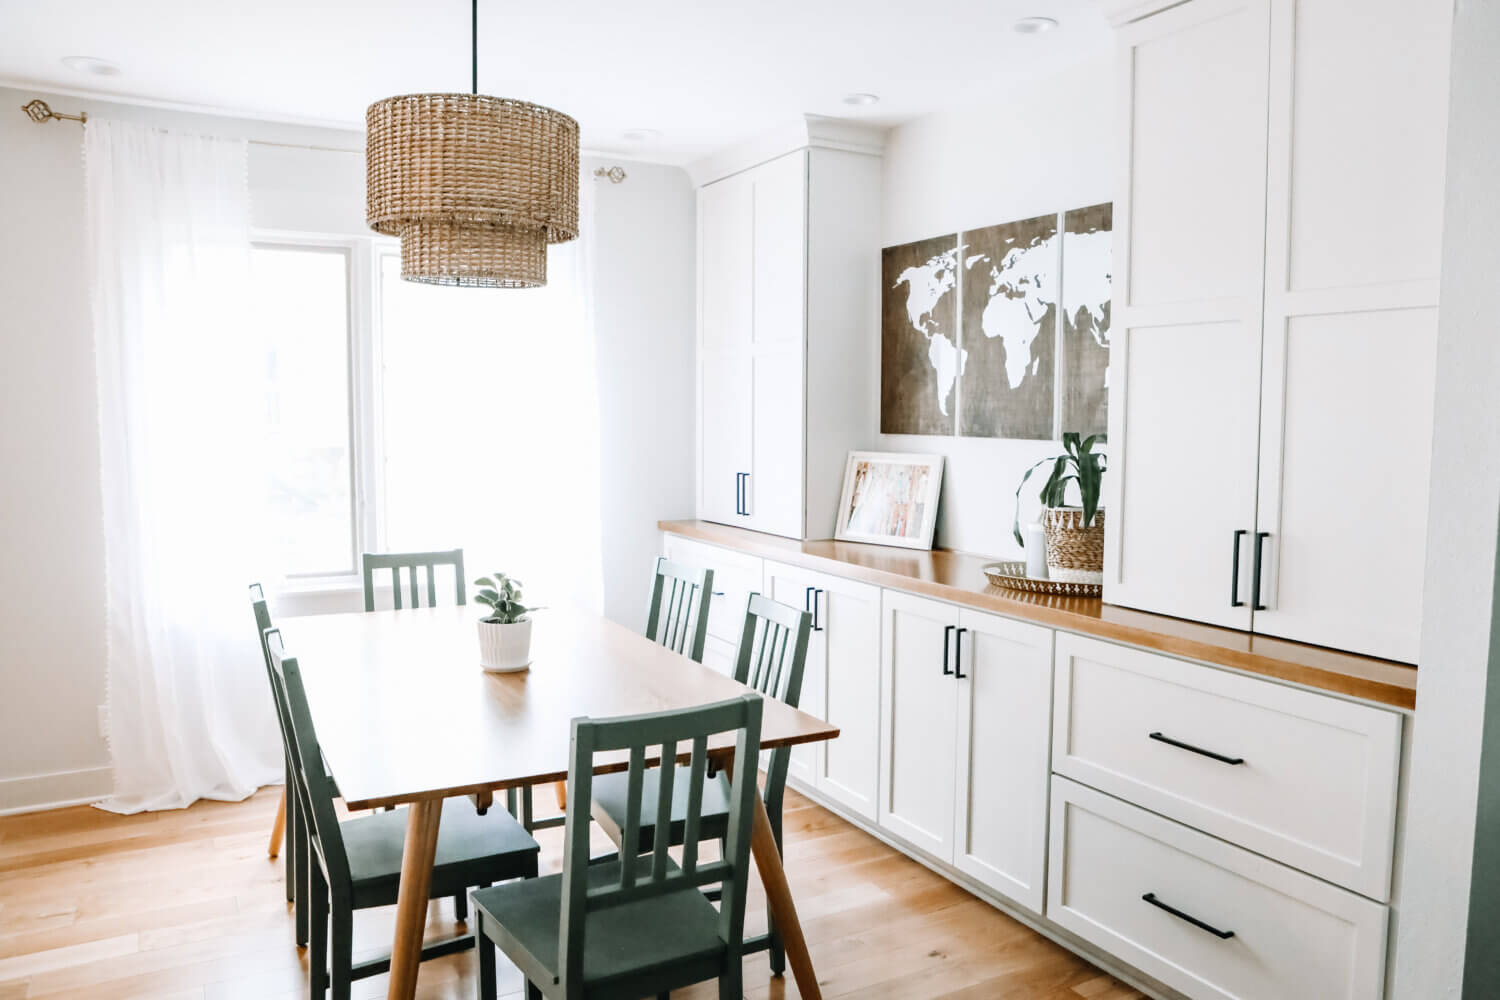 A dining room with built-in white painted cabinets with a wood top counter and 2 tall towers for additional dining room storage and space for homework supplies.